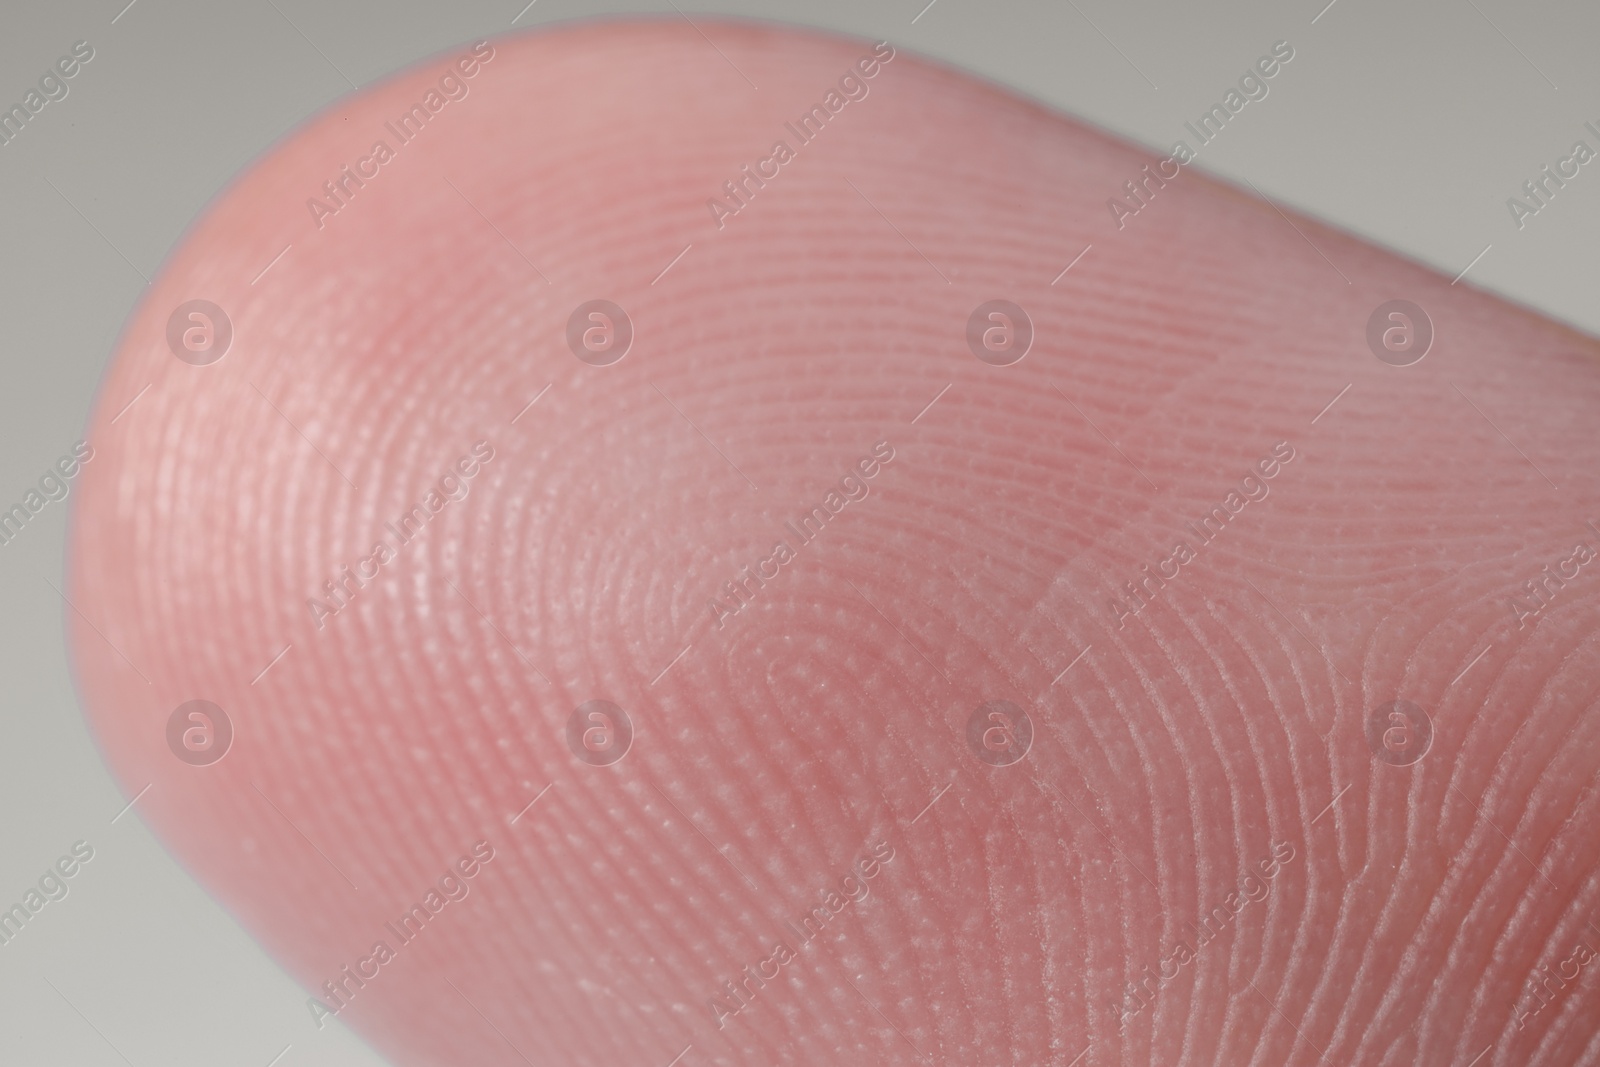 Photo of Finger with friction ridges on light blue background, macro view